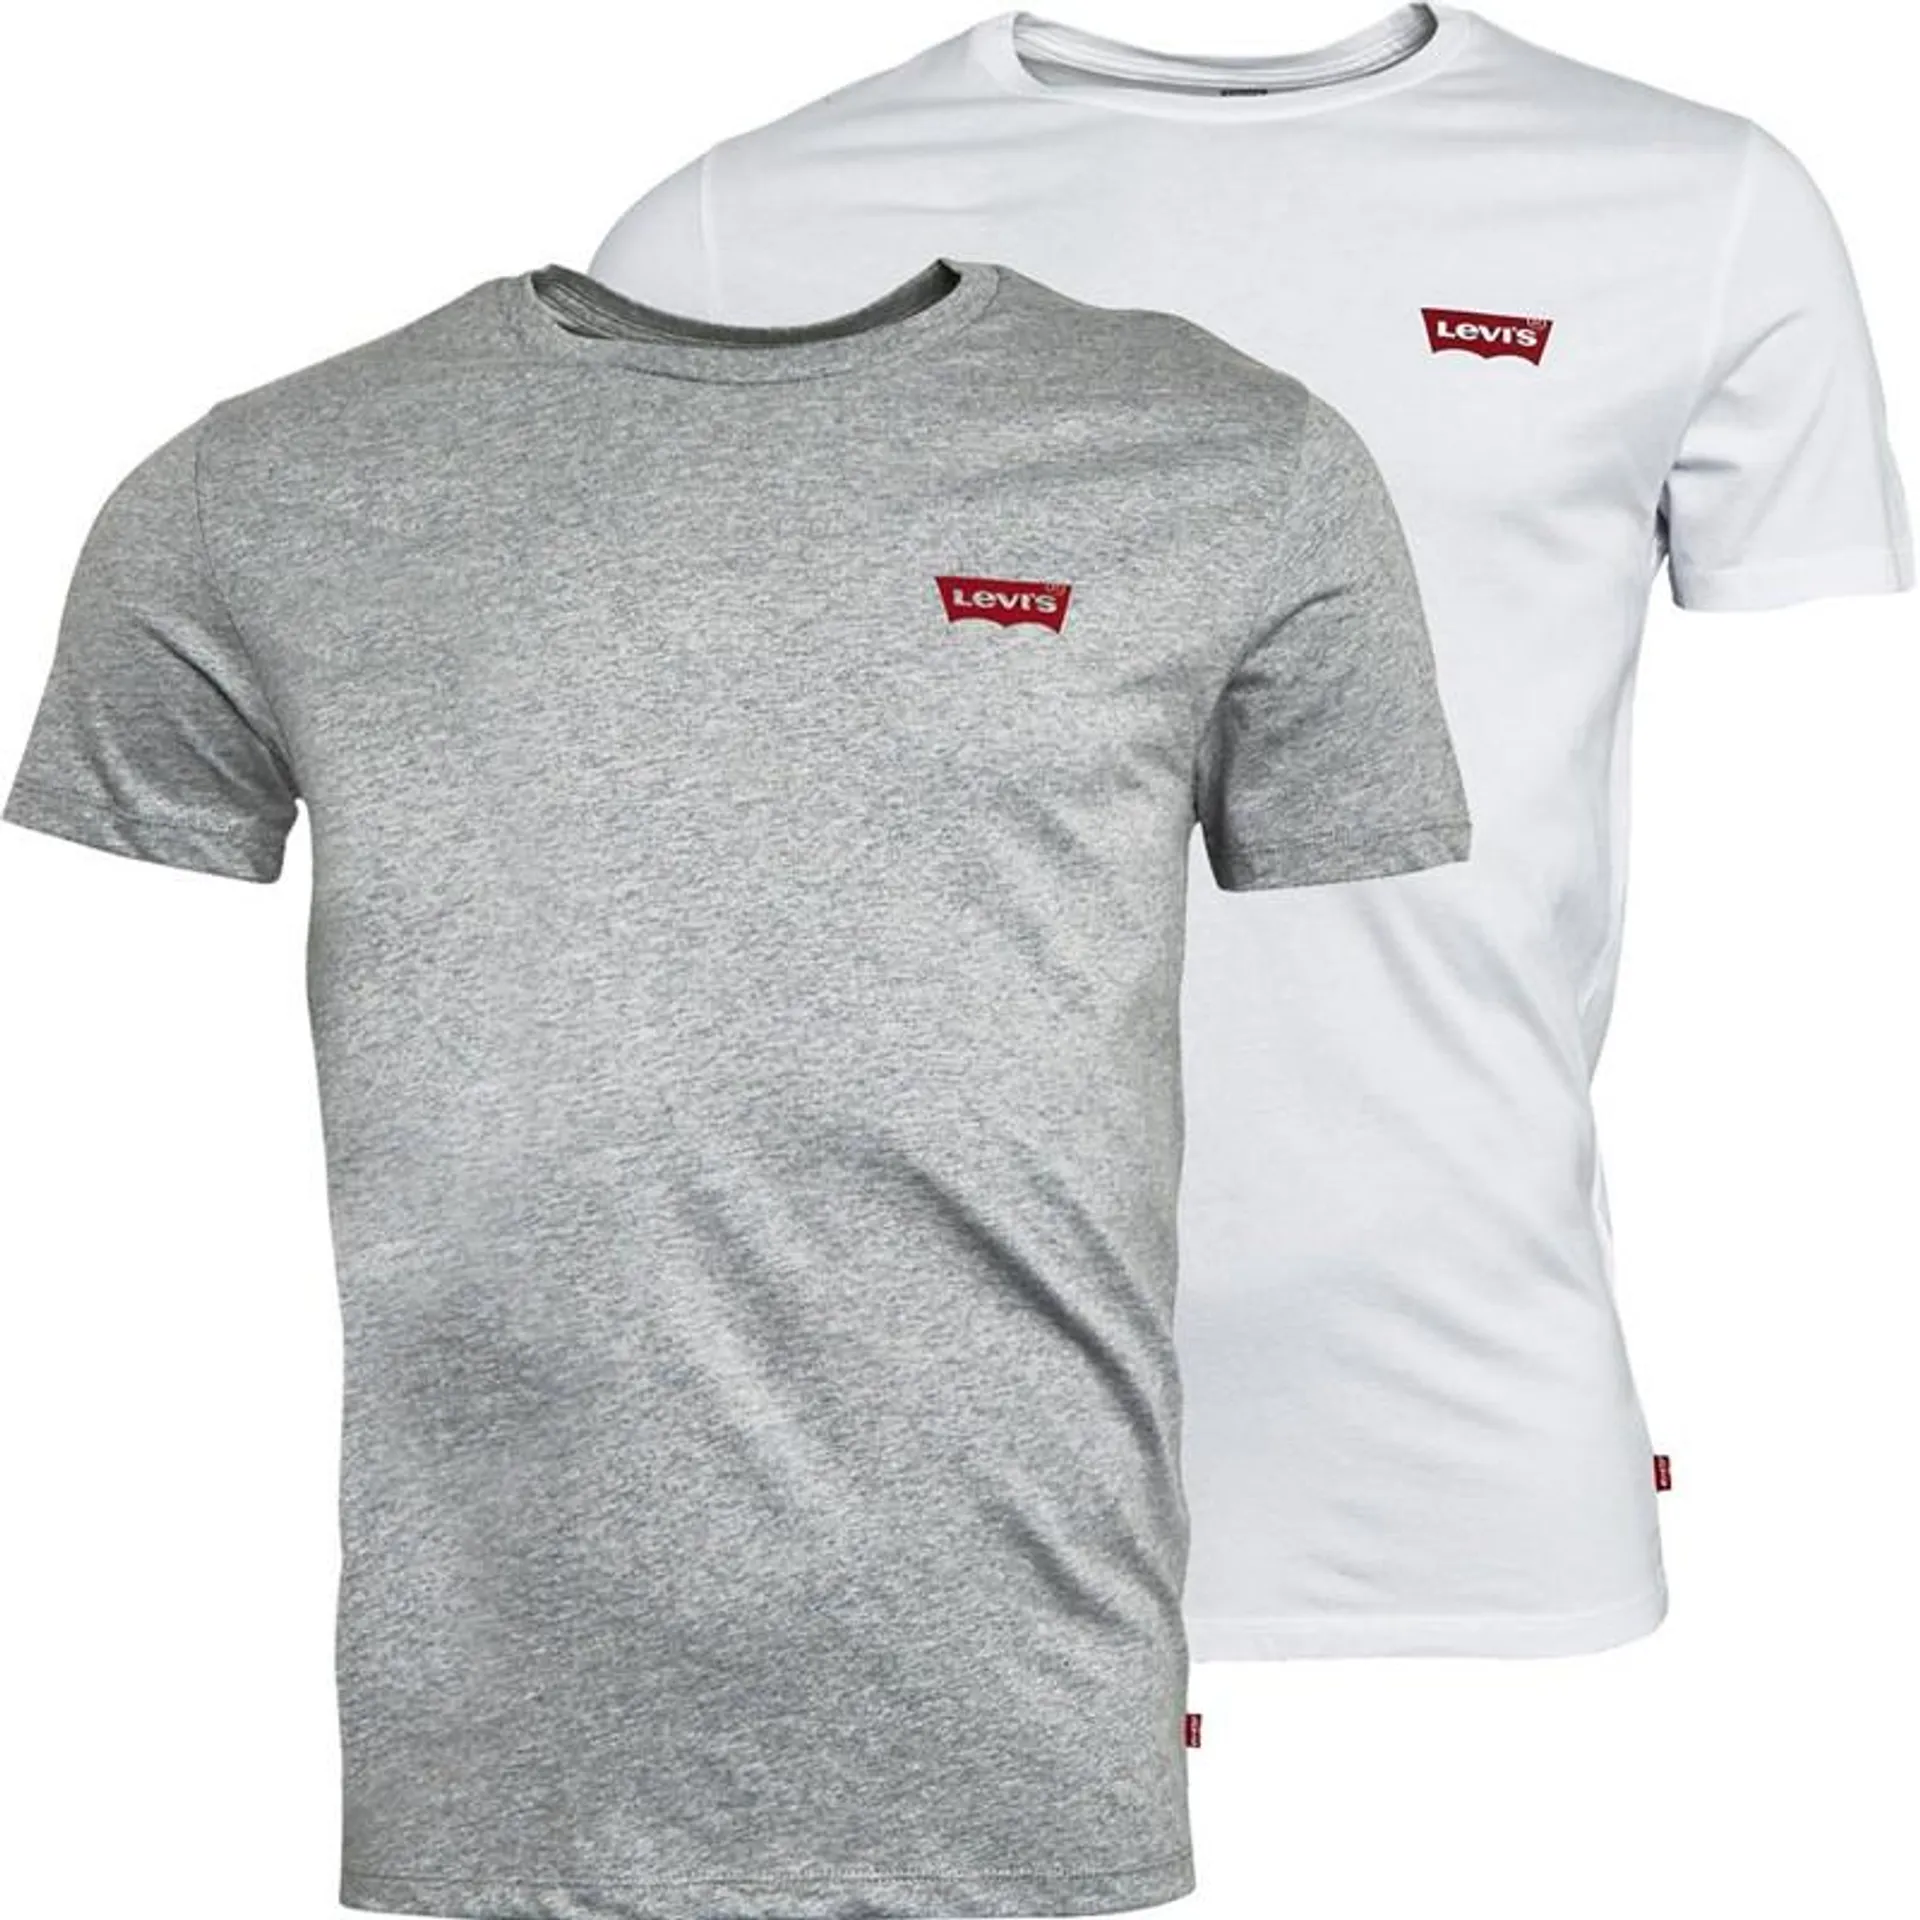 Levi's Mens Two Pack Graphic T-Shirts Graphic White/​Heather Grey